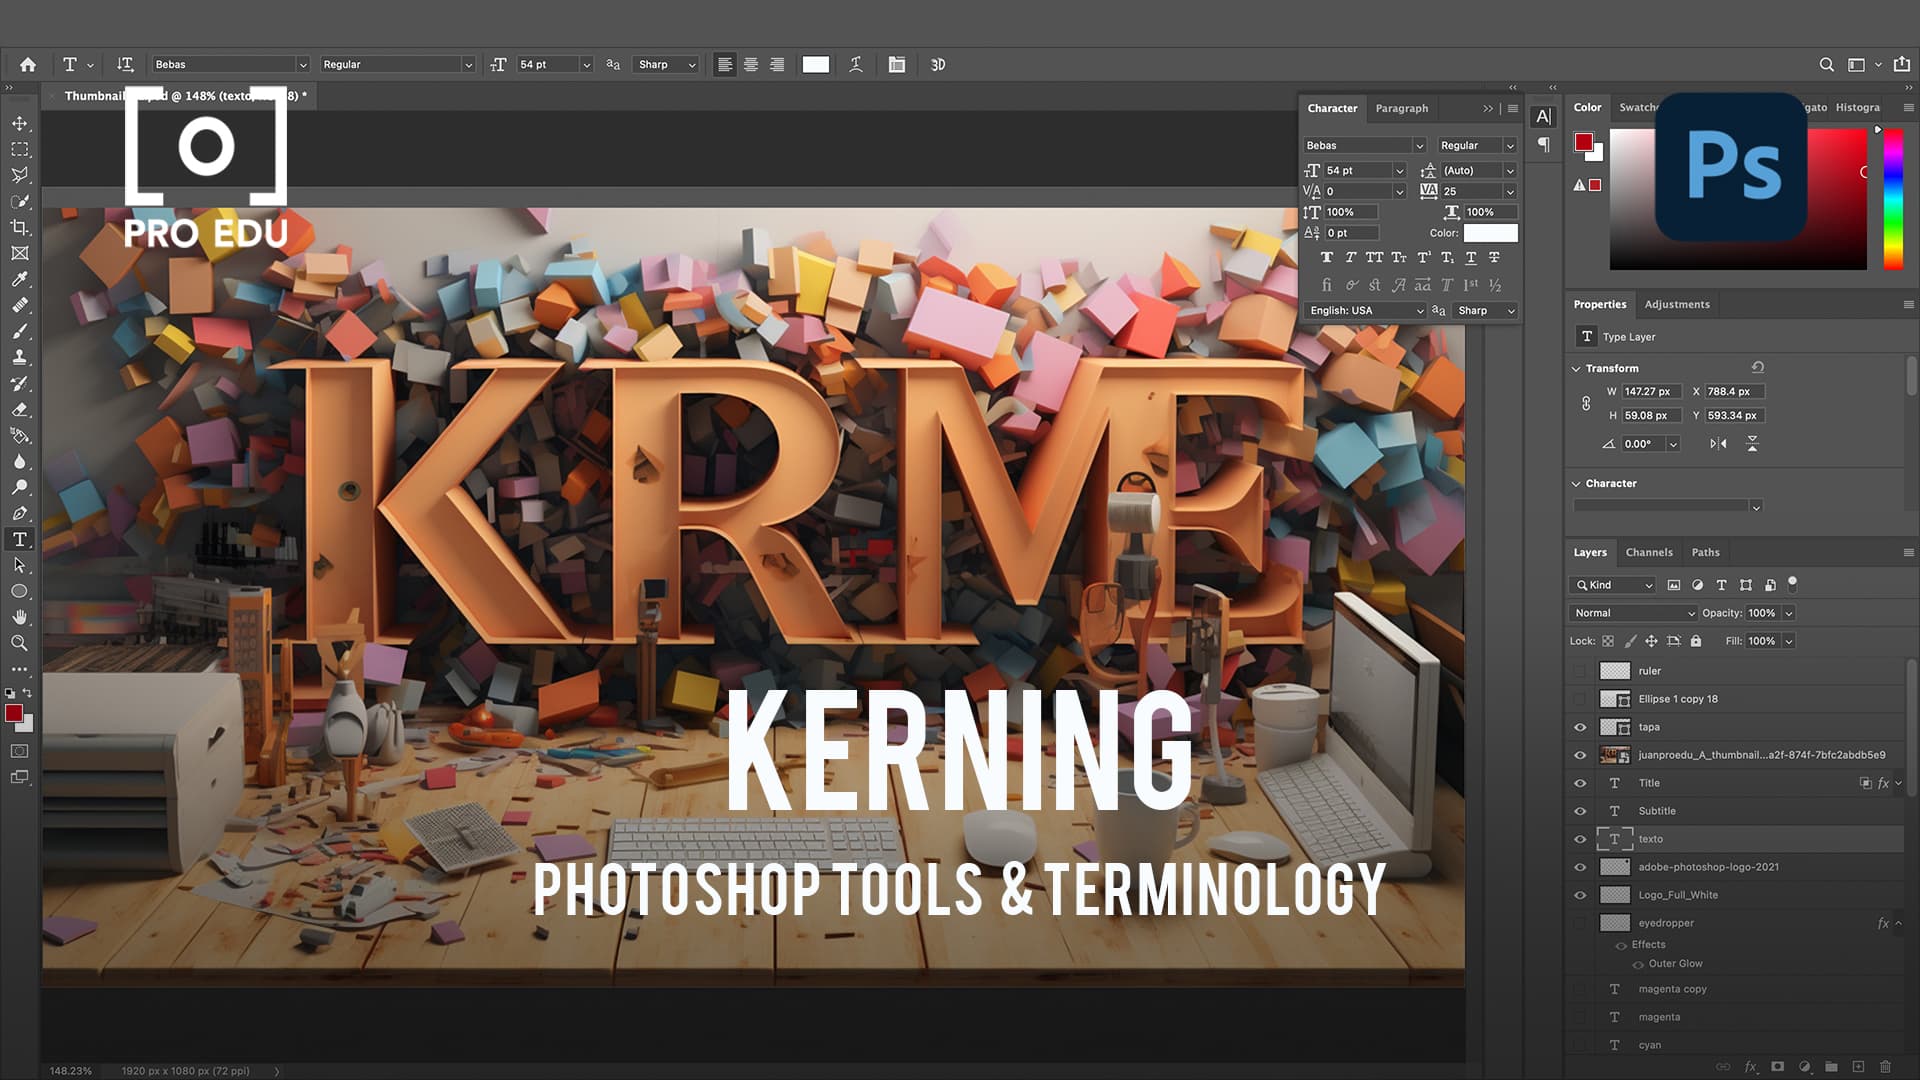 Kerning and Typography in Photoshop - PRO EDU Guide